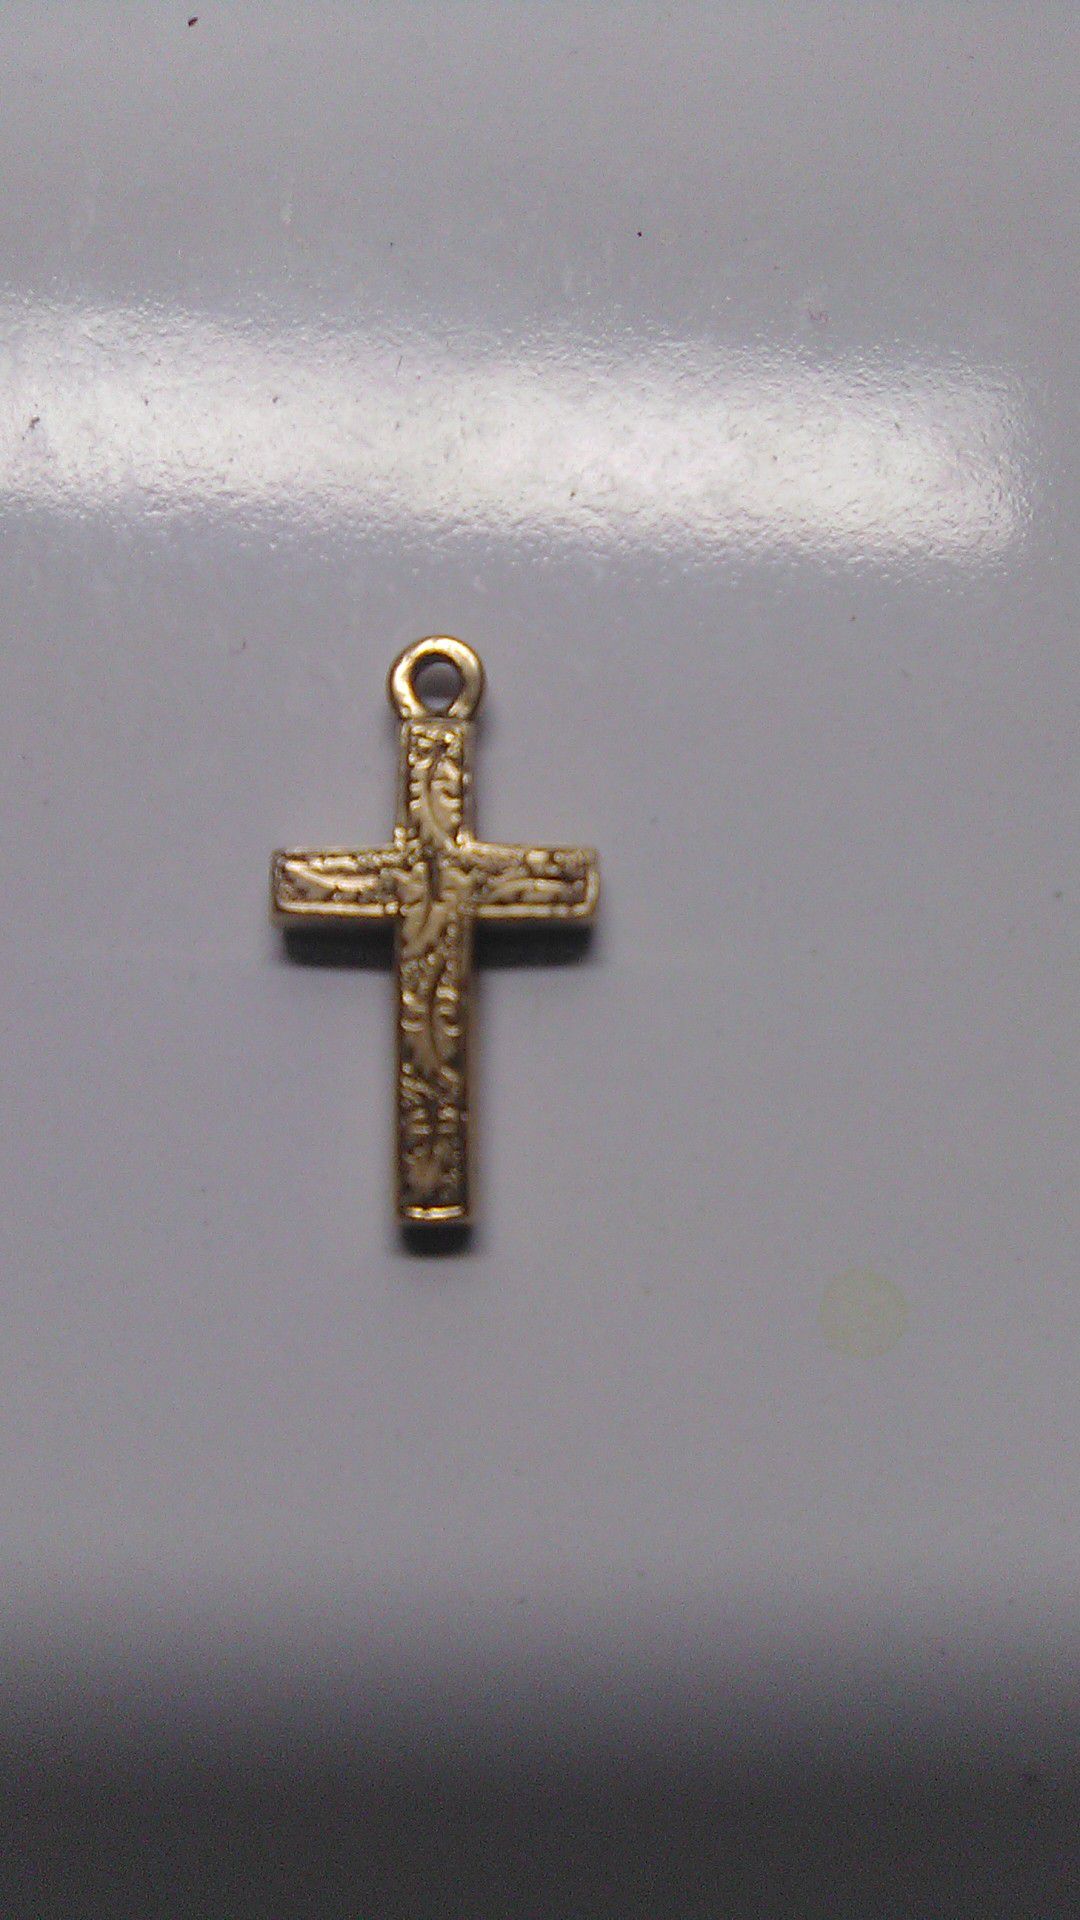 Vintage Cross Charm, plus ull get a free chain to